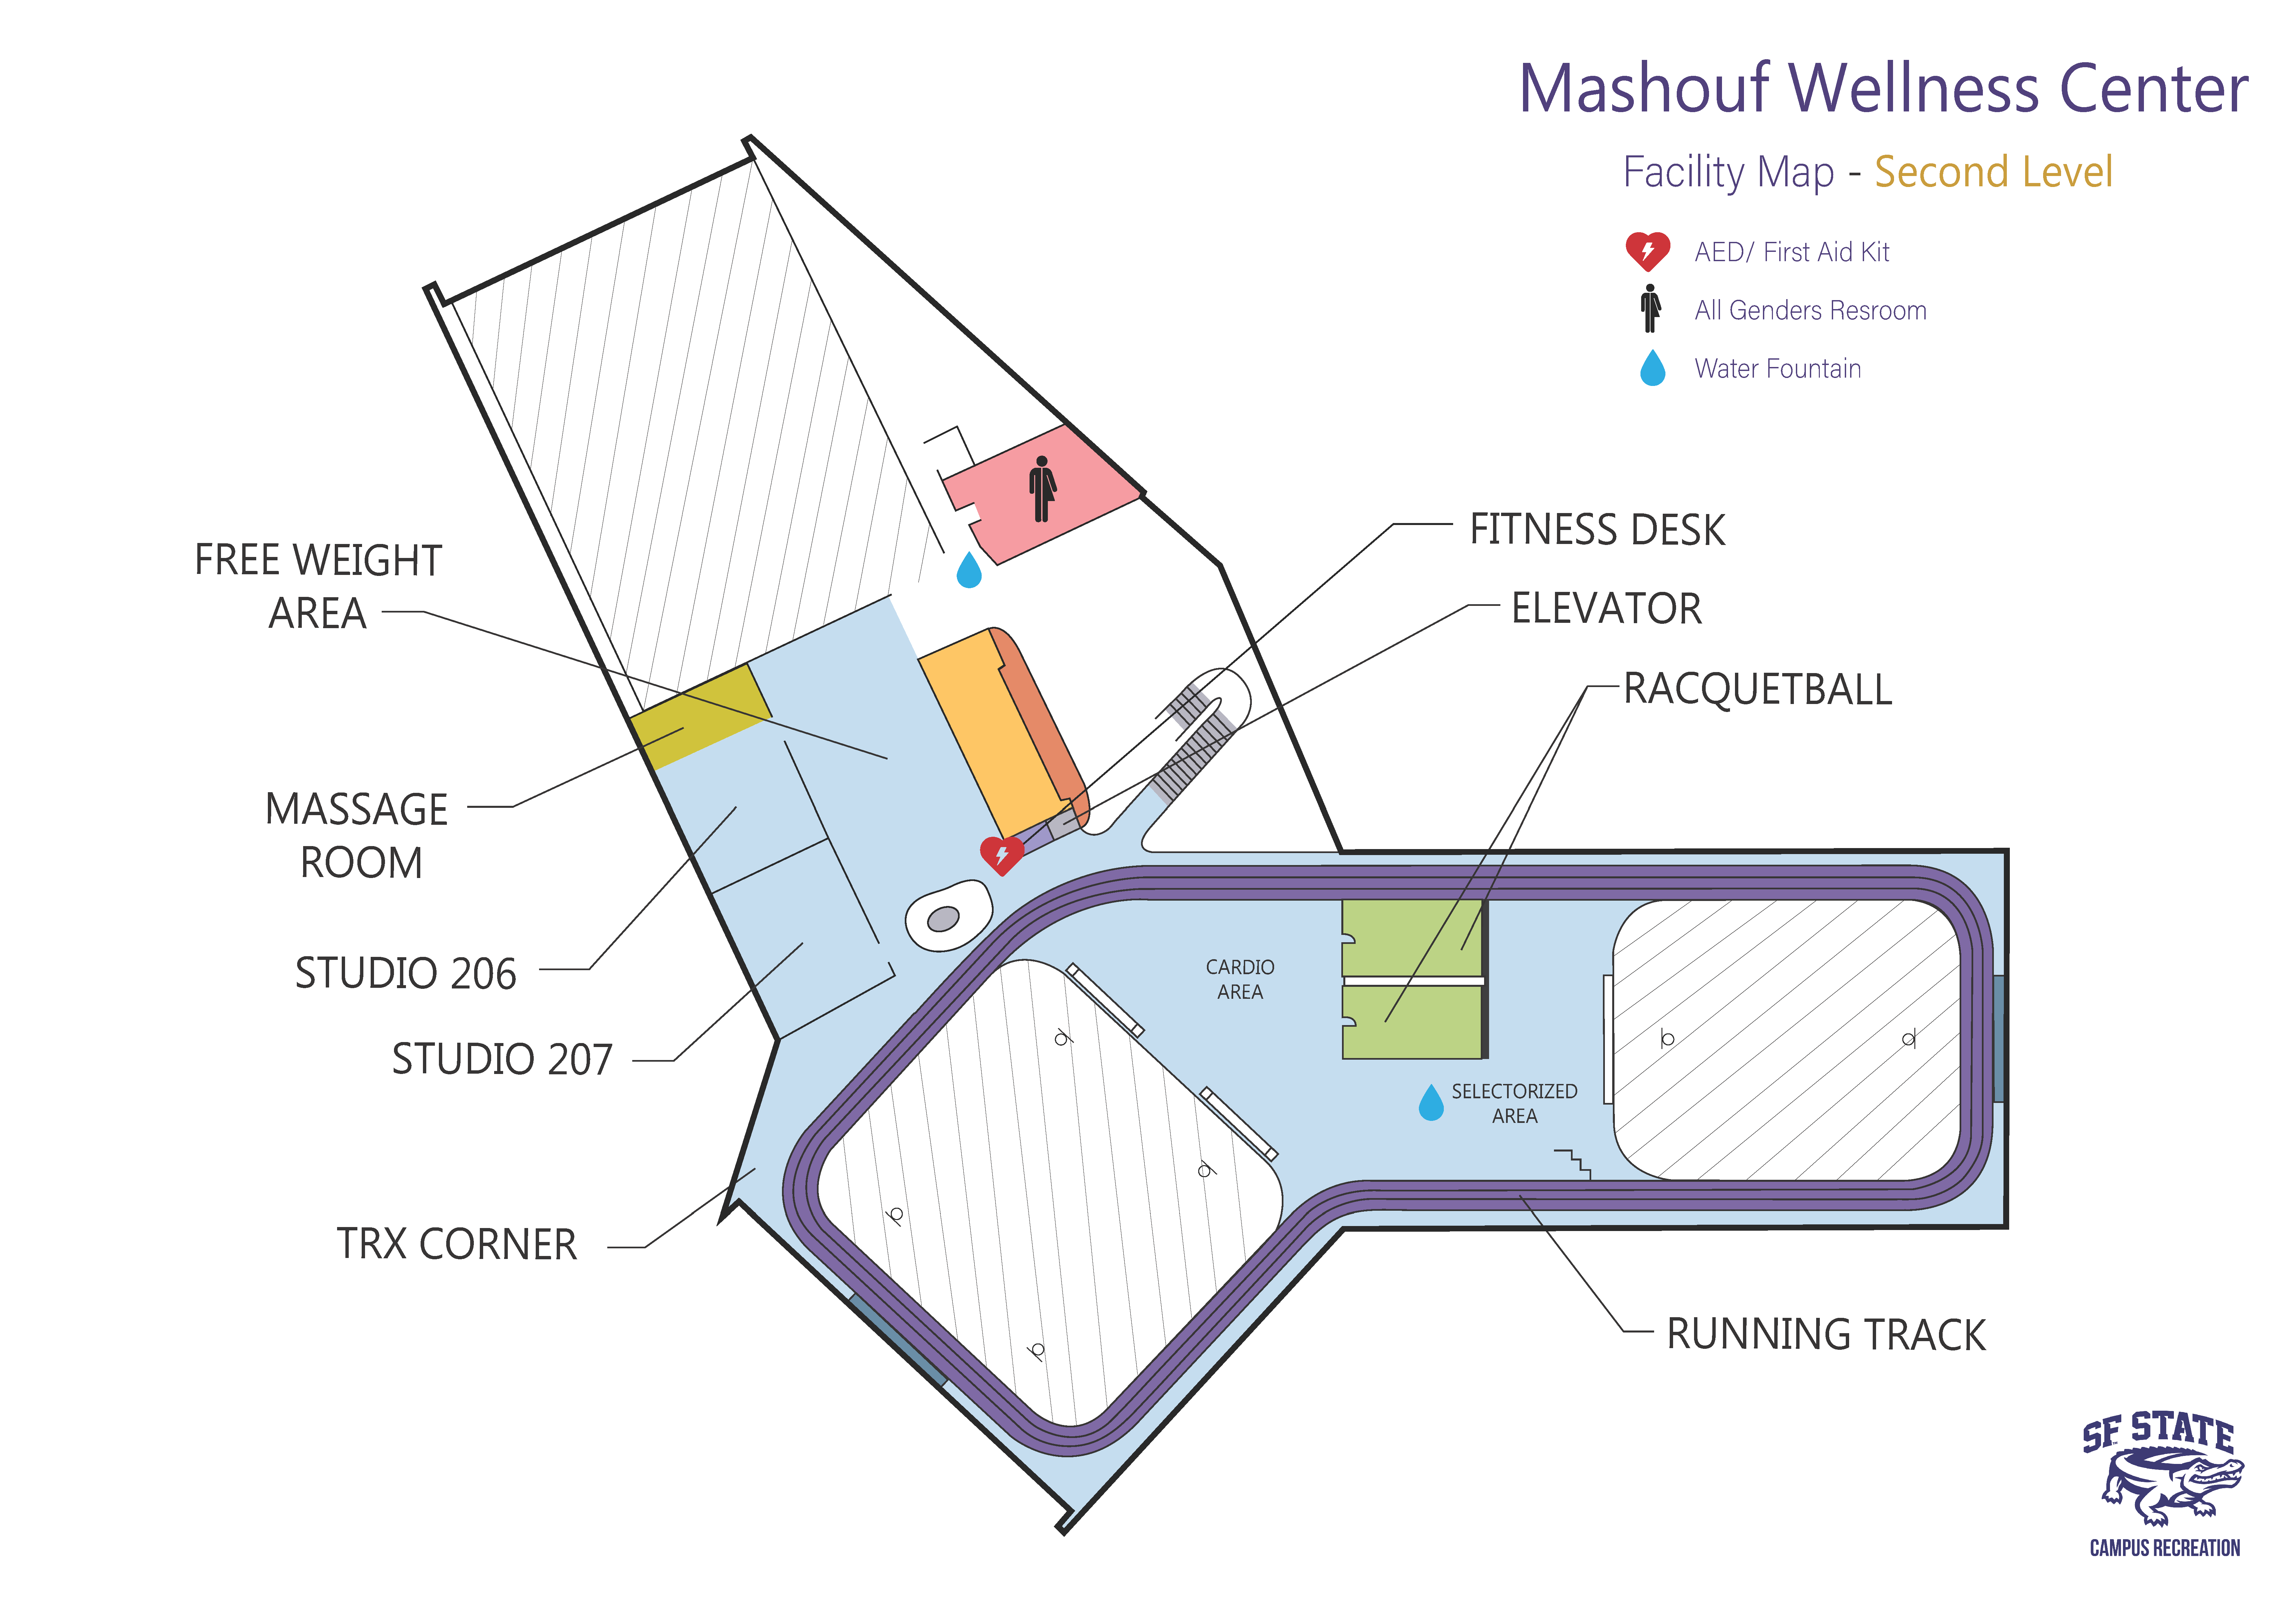 MWC Map - 1st Floor